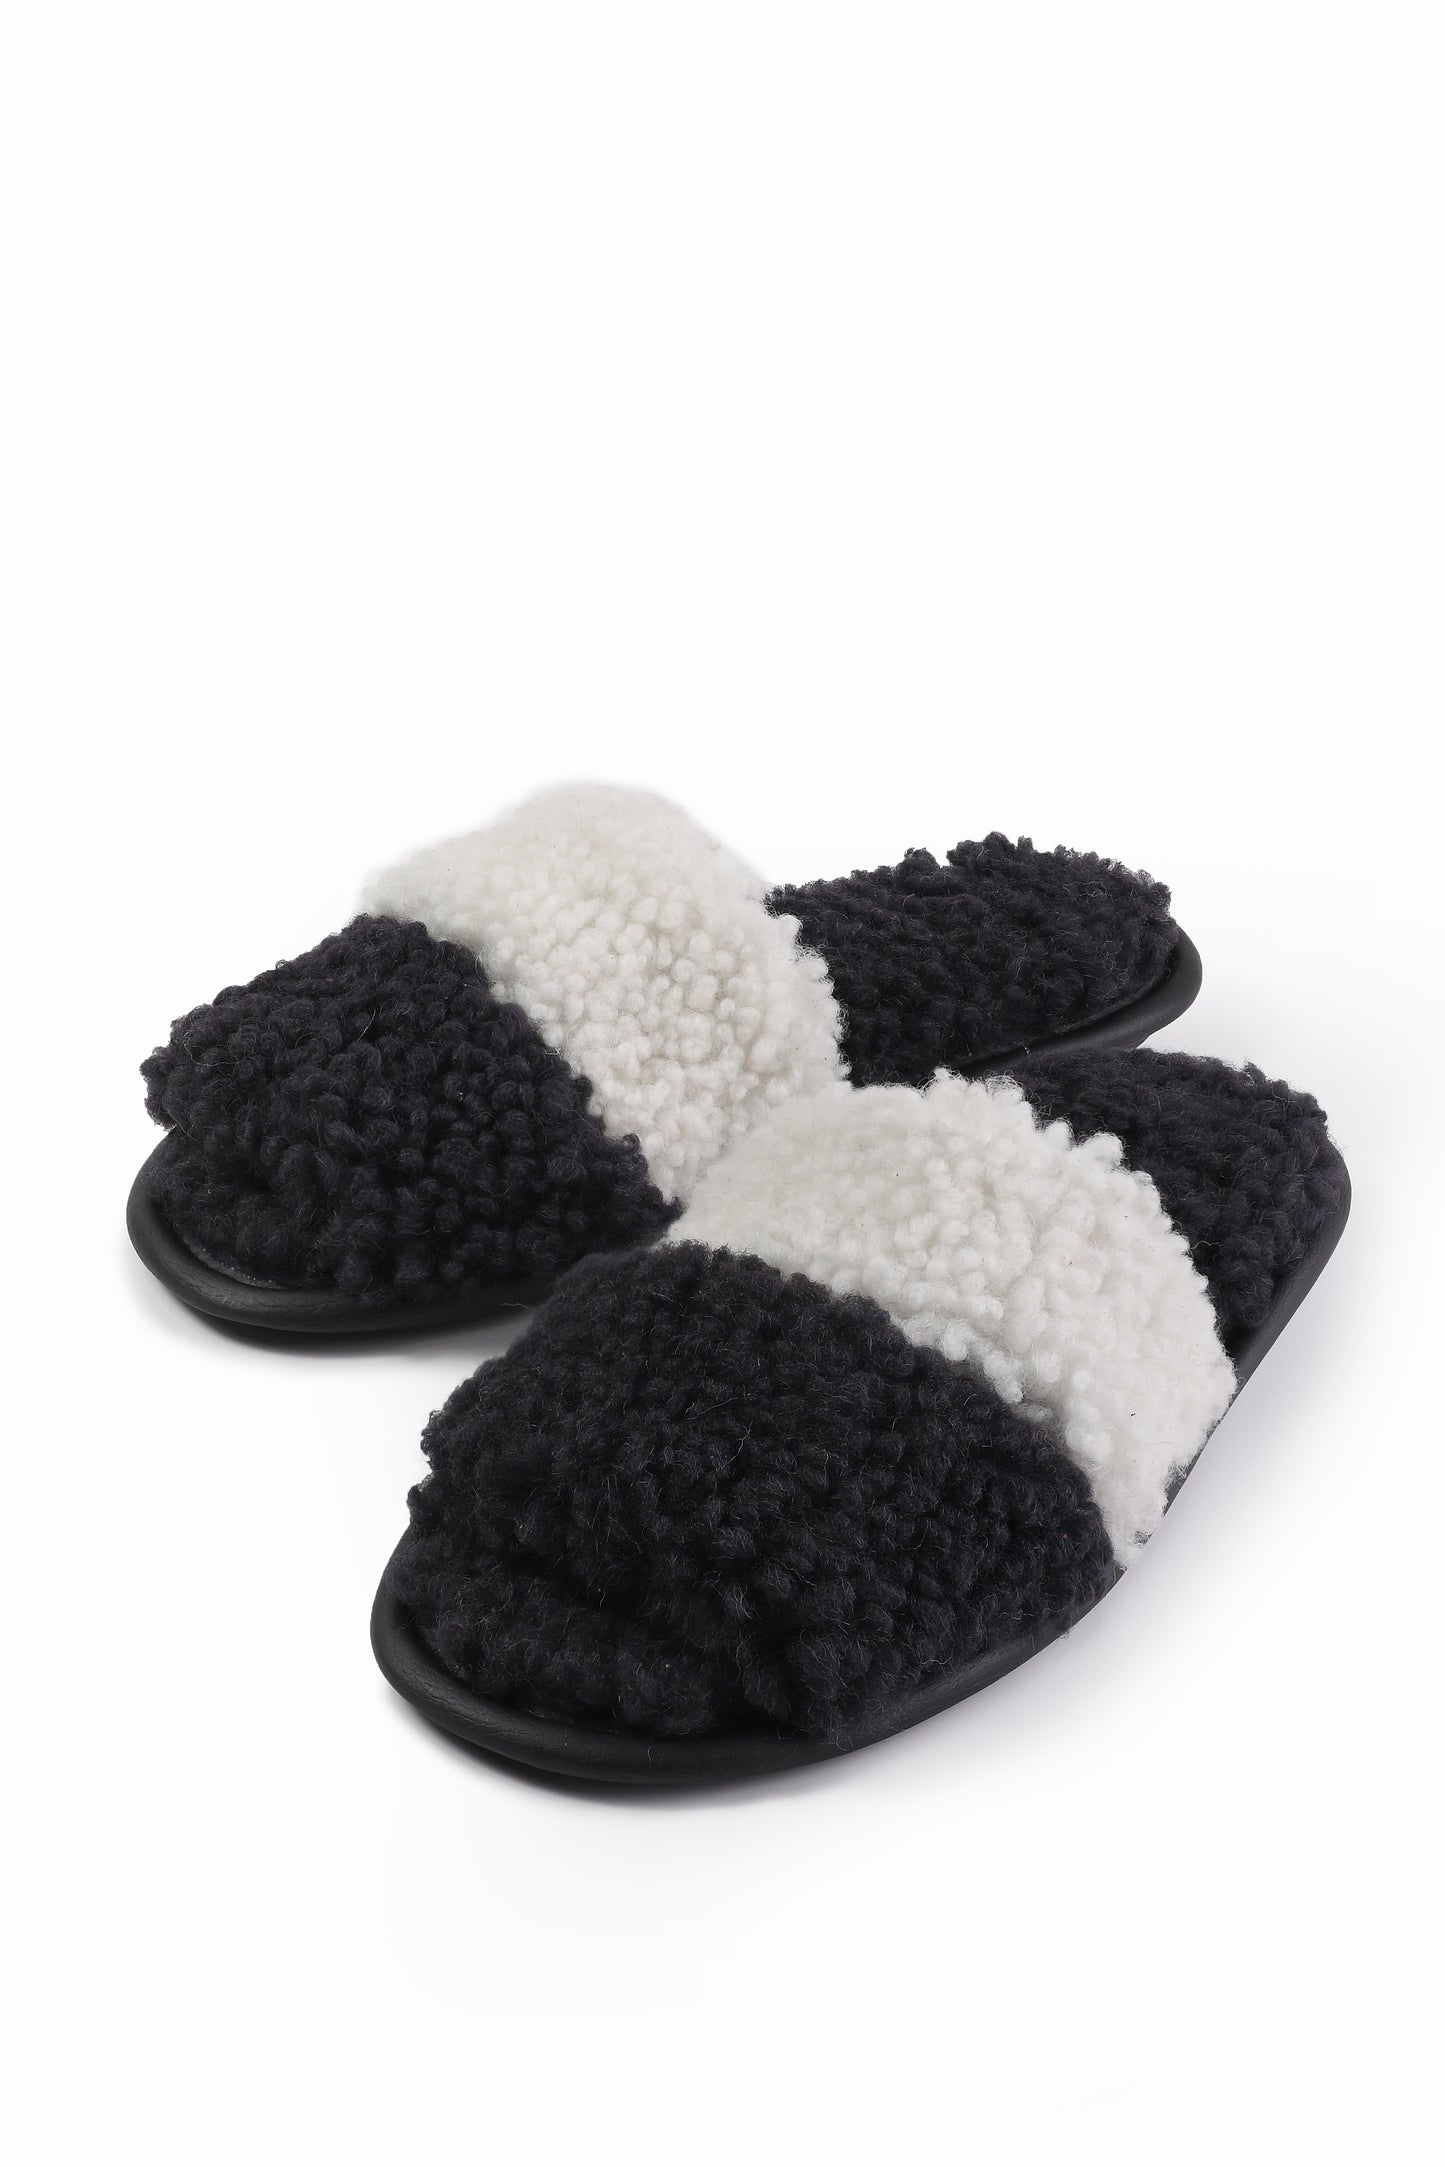 Soft Sheepskin Slippers with Black Fur Lining in Black & White Color